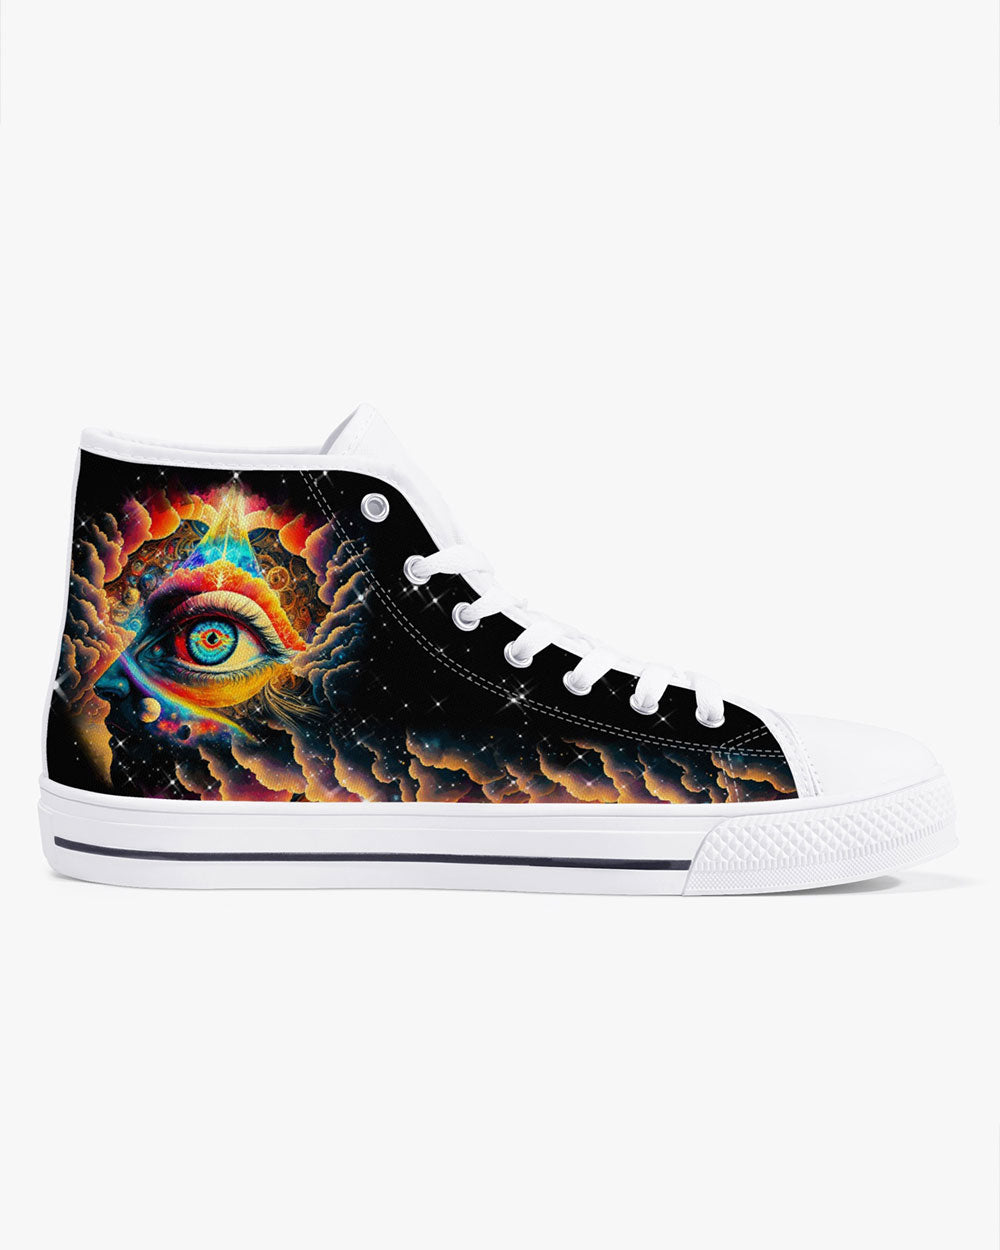 THE EYES ARE USELESS WHEN THE MIND IS BLIND HIGH TOP CANVAS SHOES - TYTM2103234